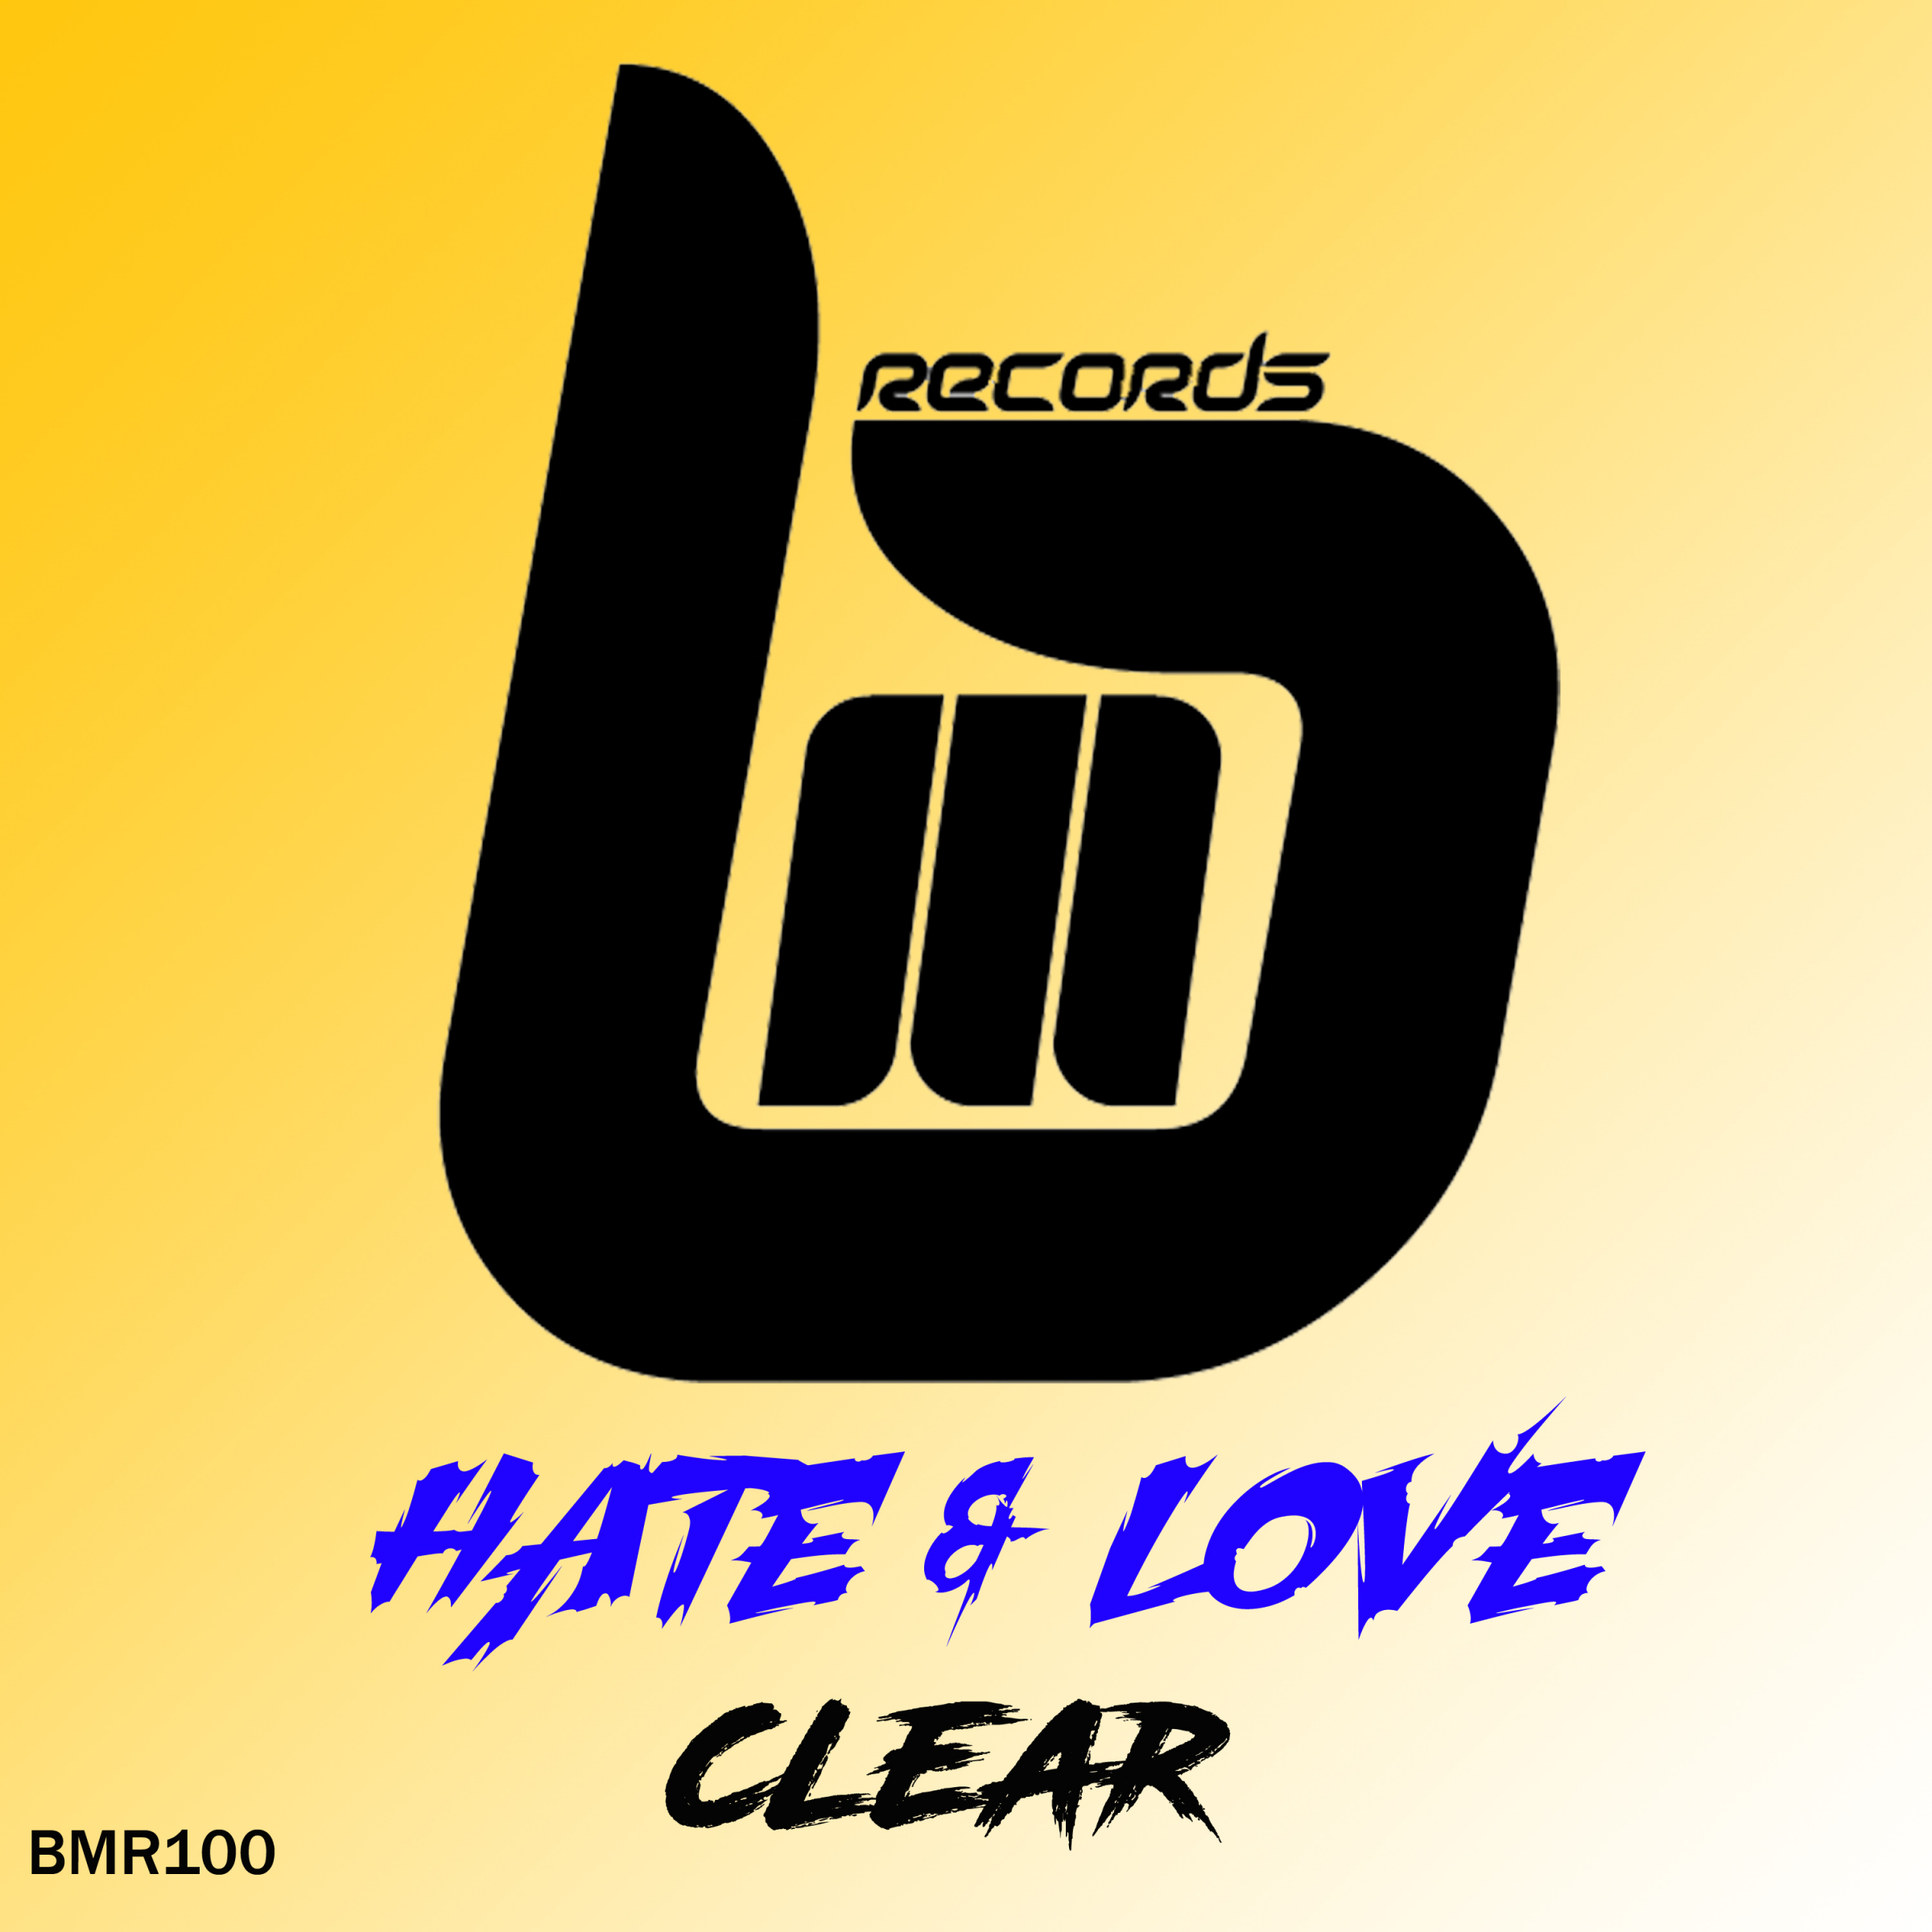 Clear love. Love + hate. Love/hate discography.